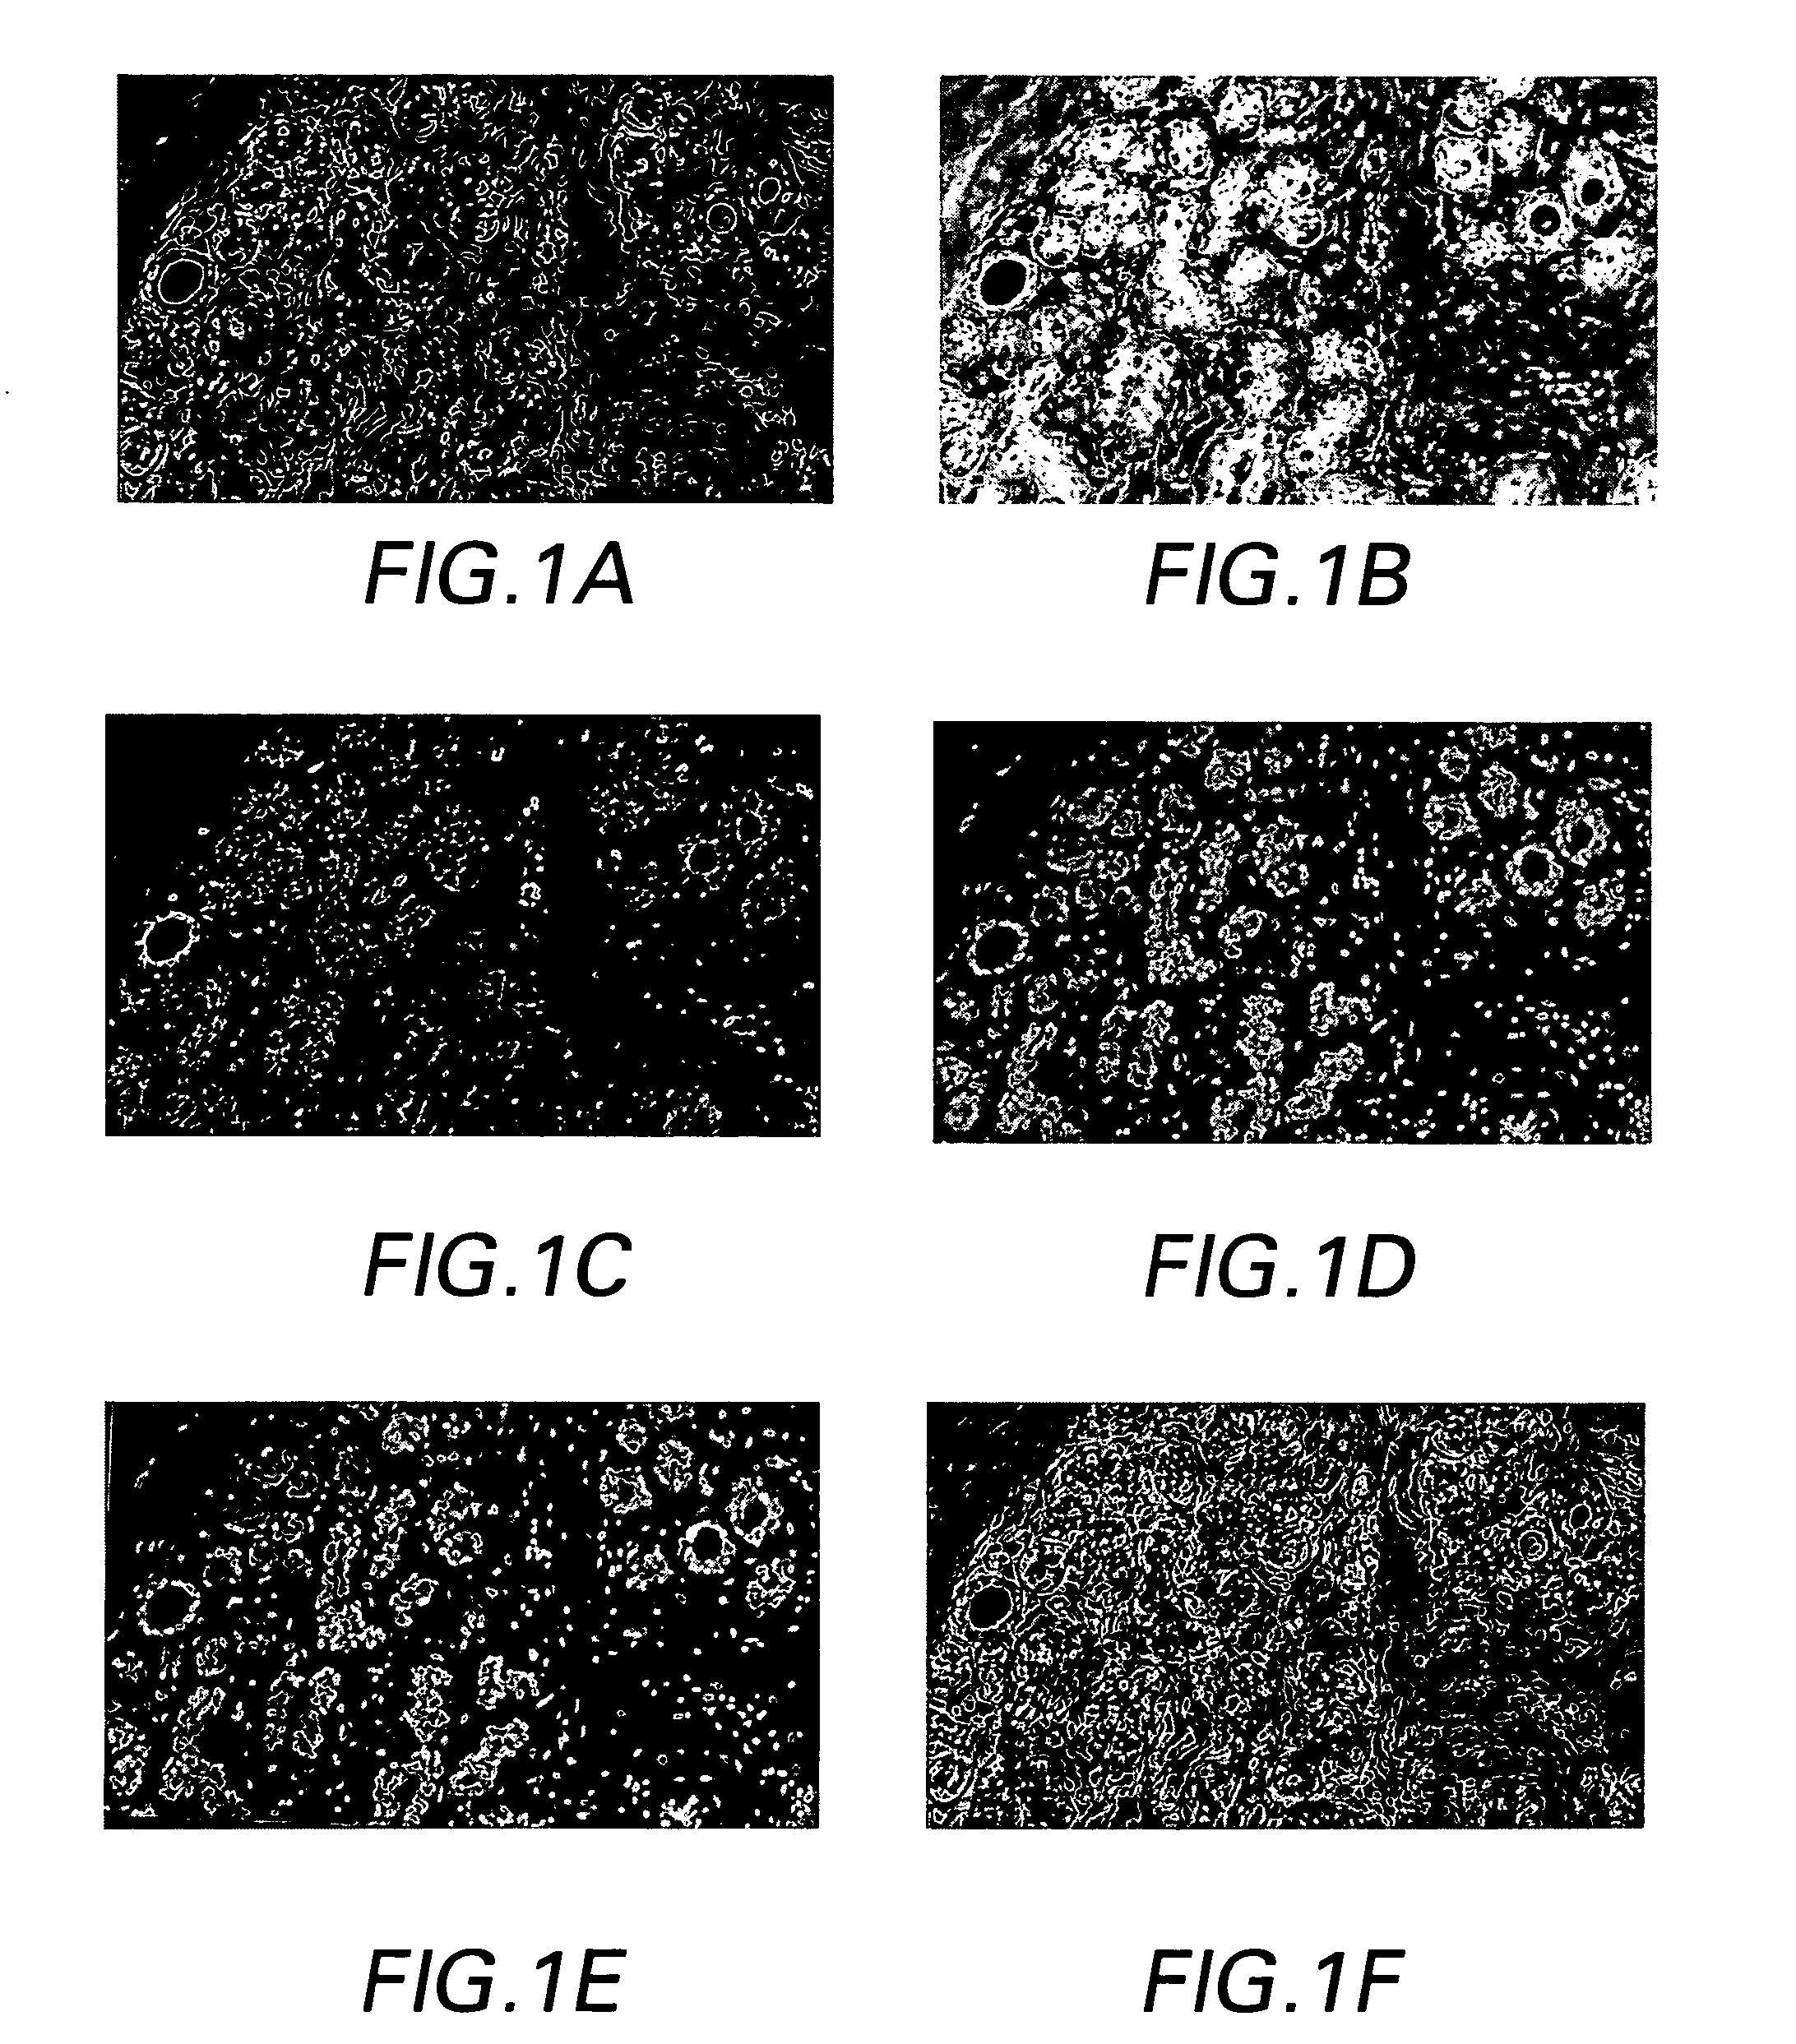 System and method for co-registering multi-channel images of a tissue micro array